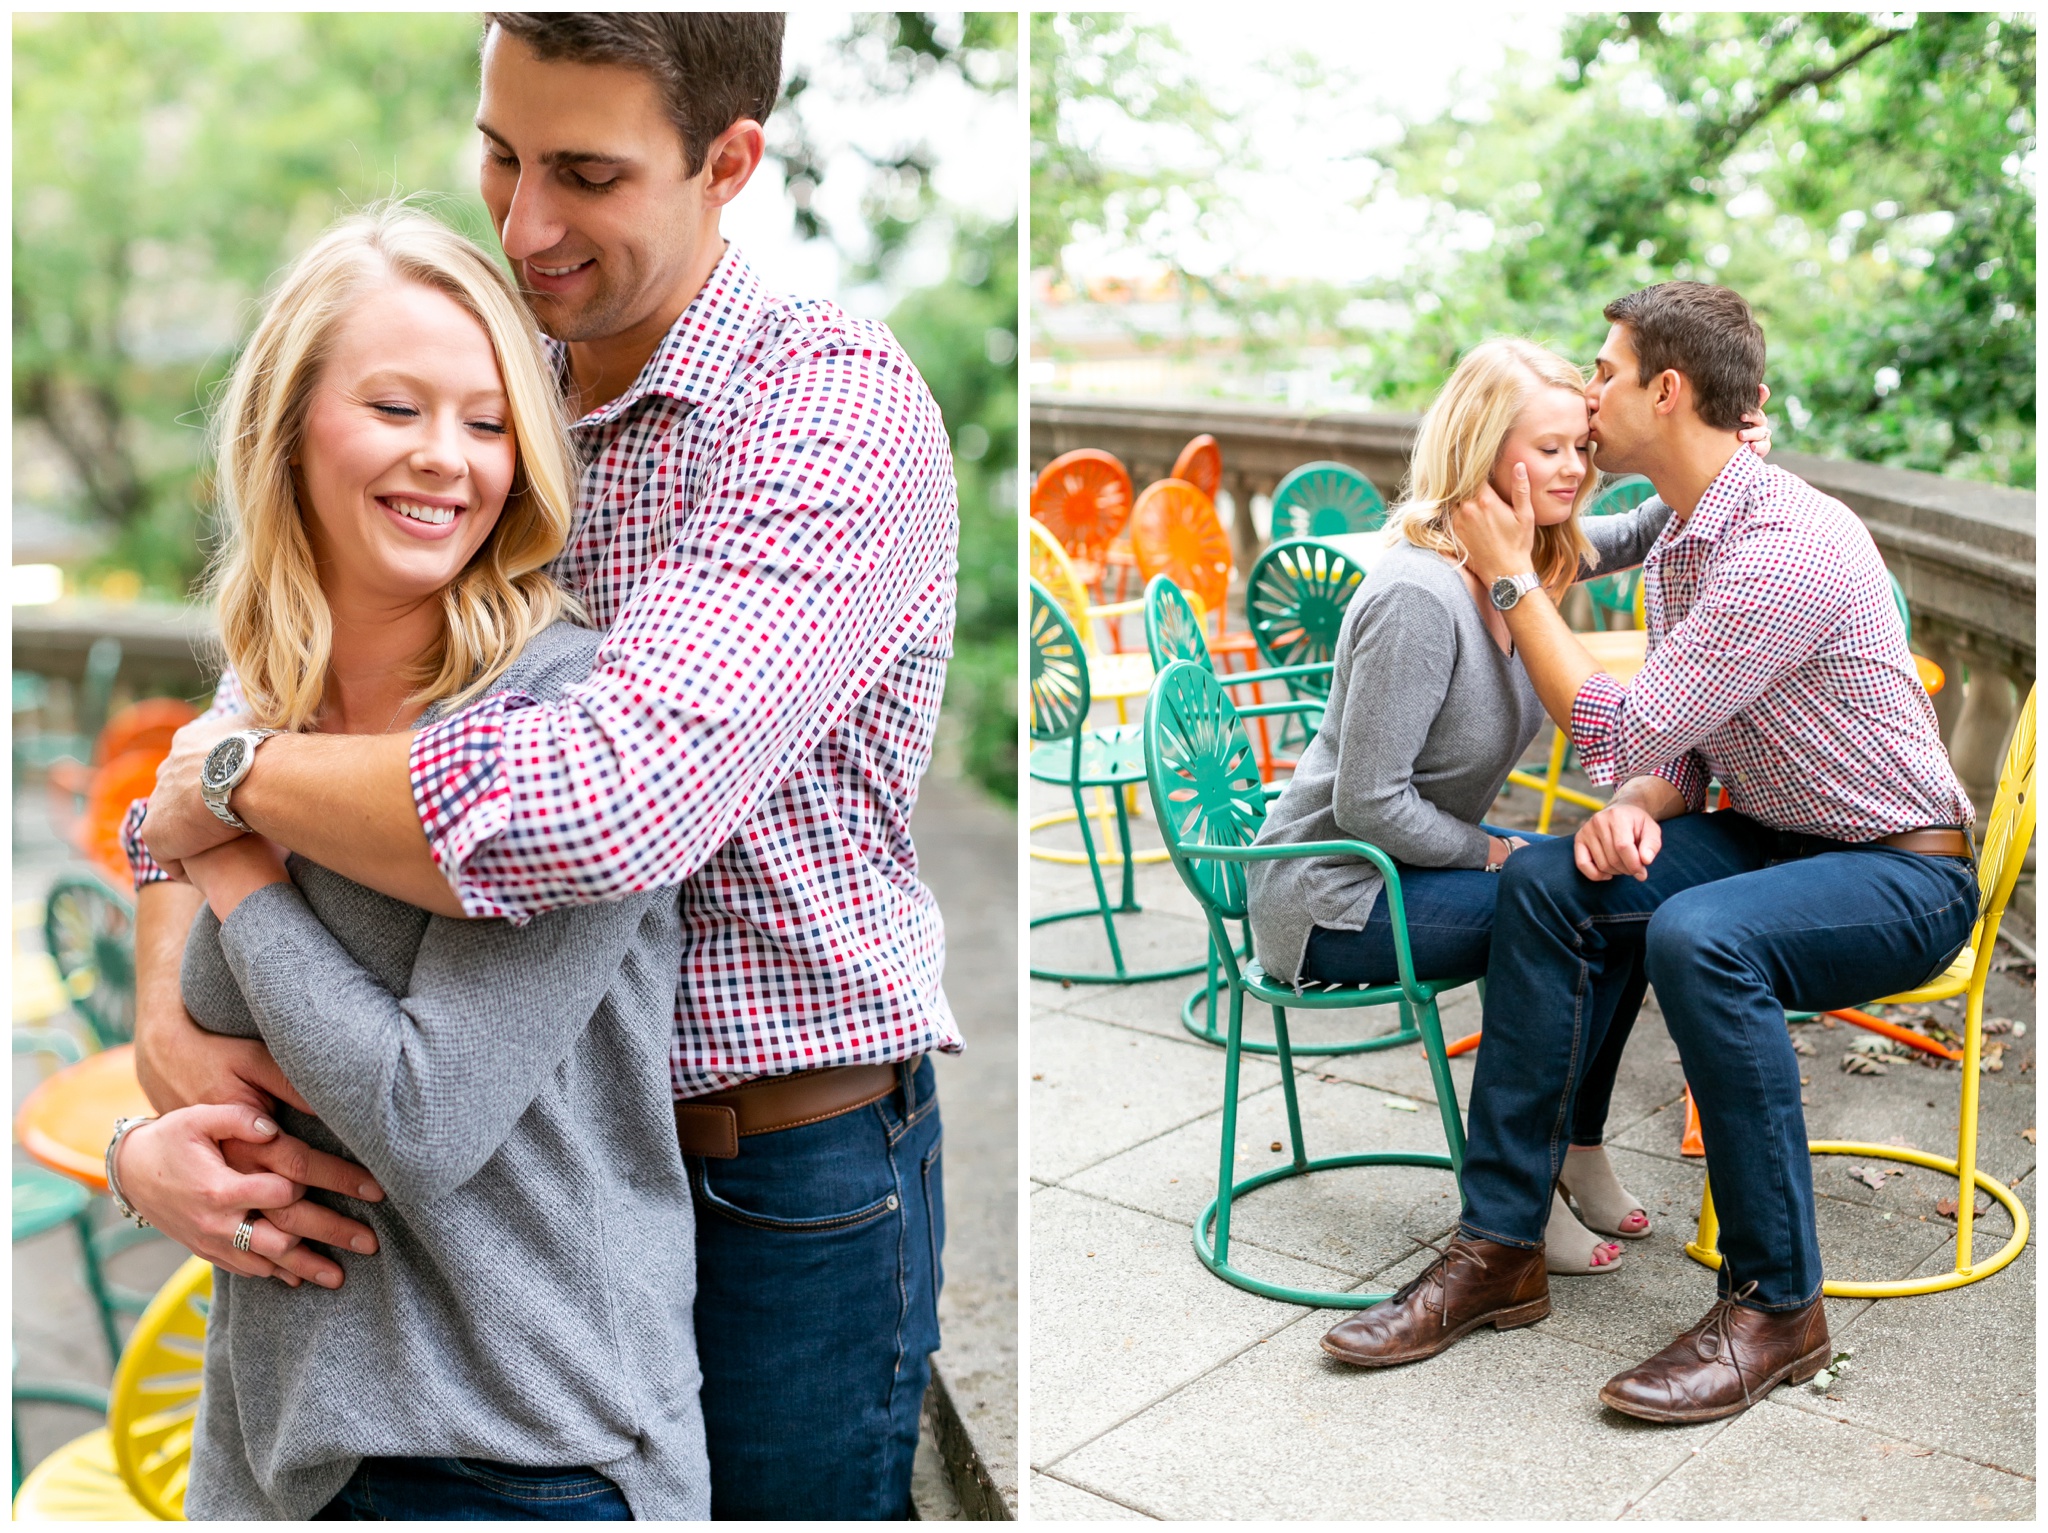 Downtown_madison_wisconsin_engagement_session_1529.jpg